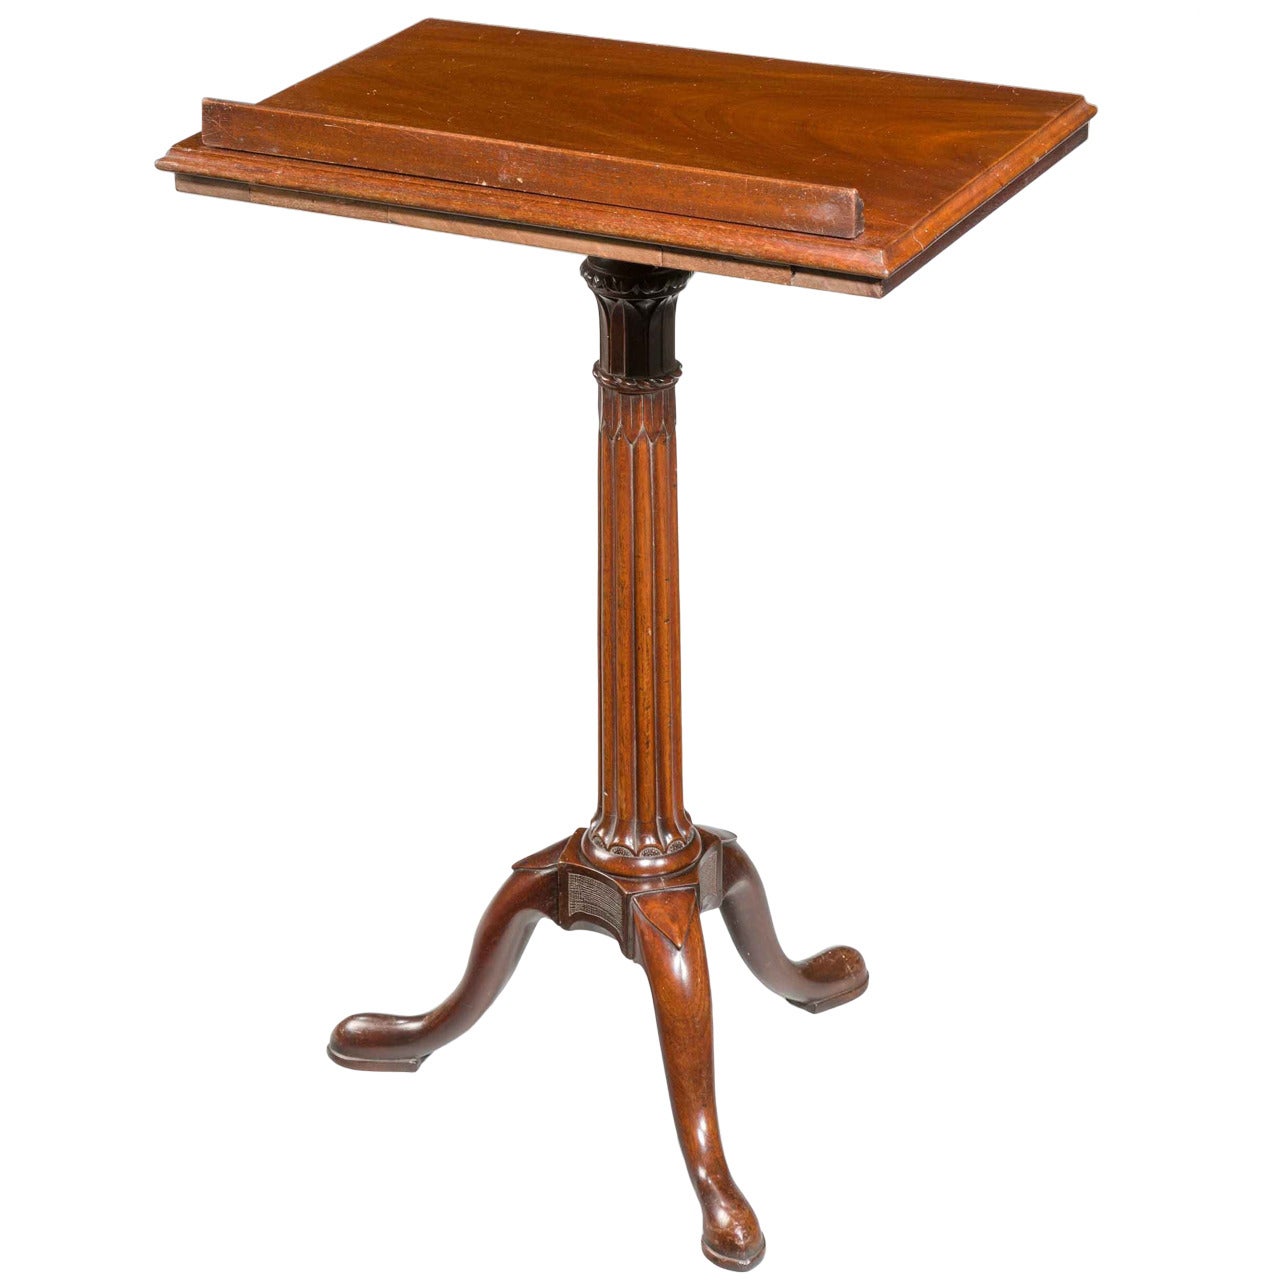 Chippendale Period Mahogany Reading or Writing Table